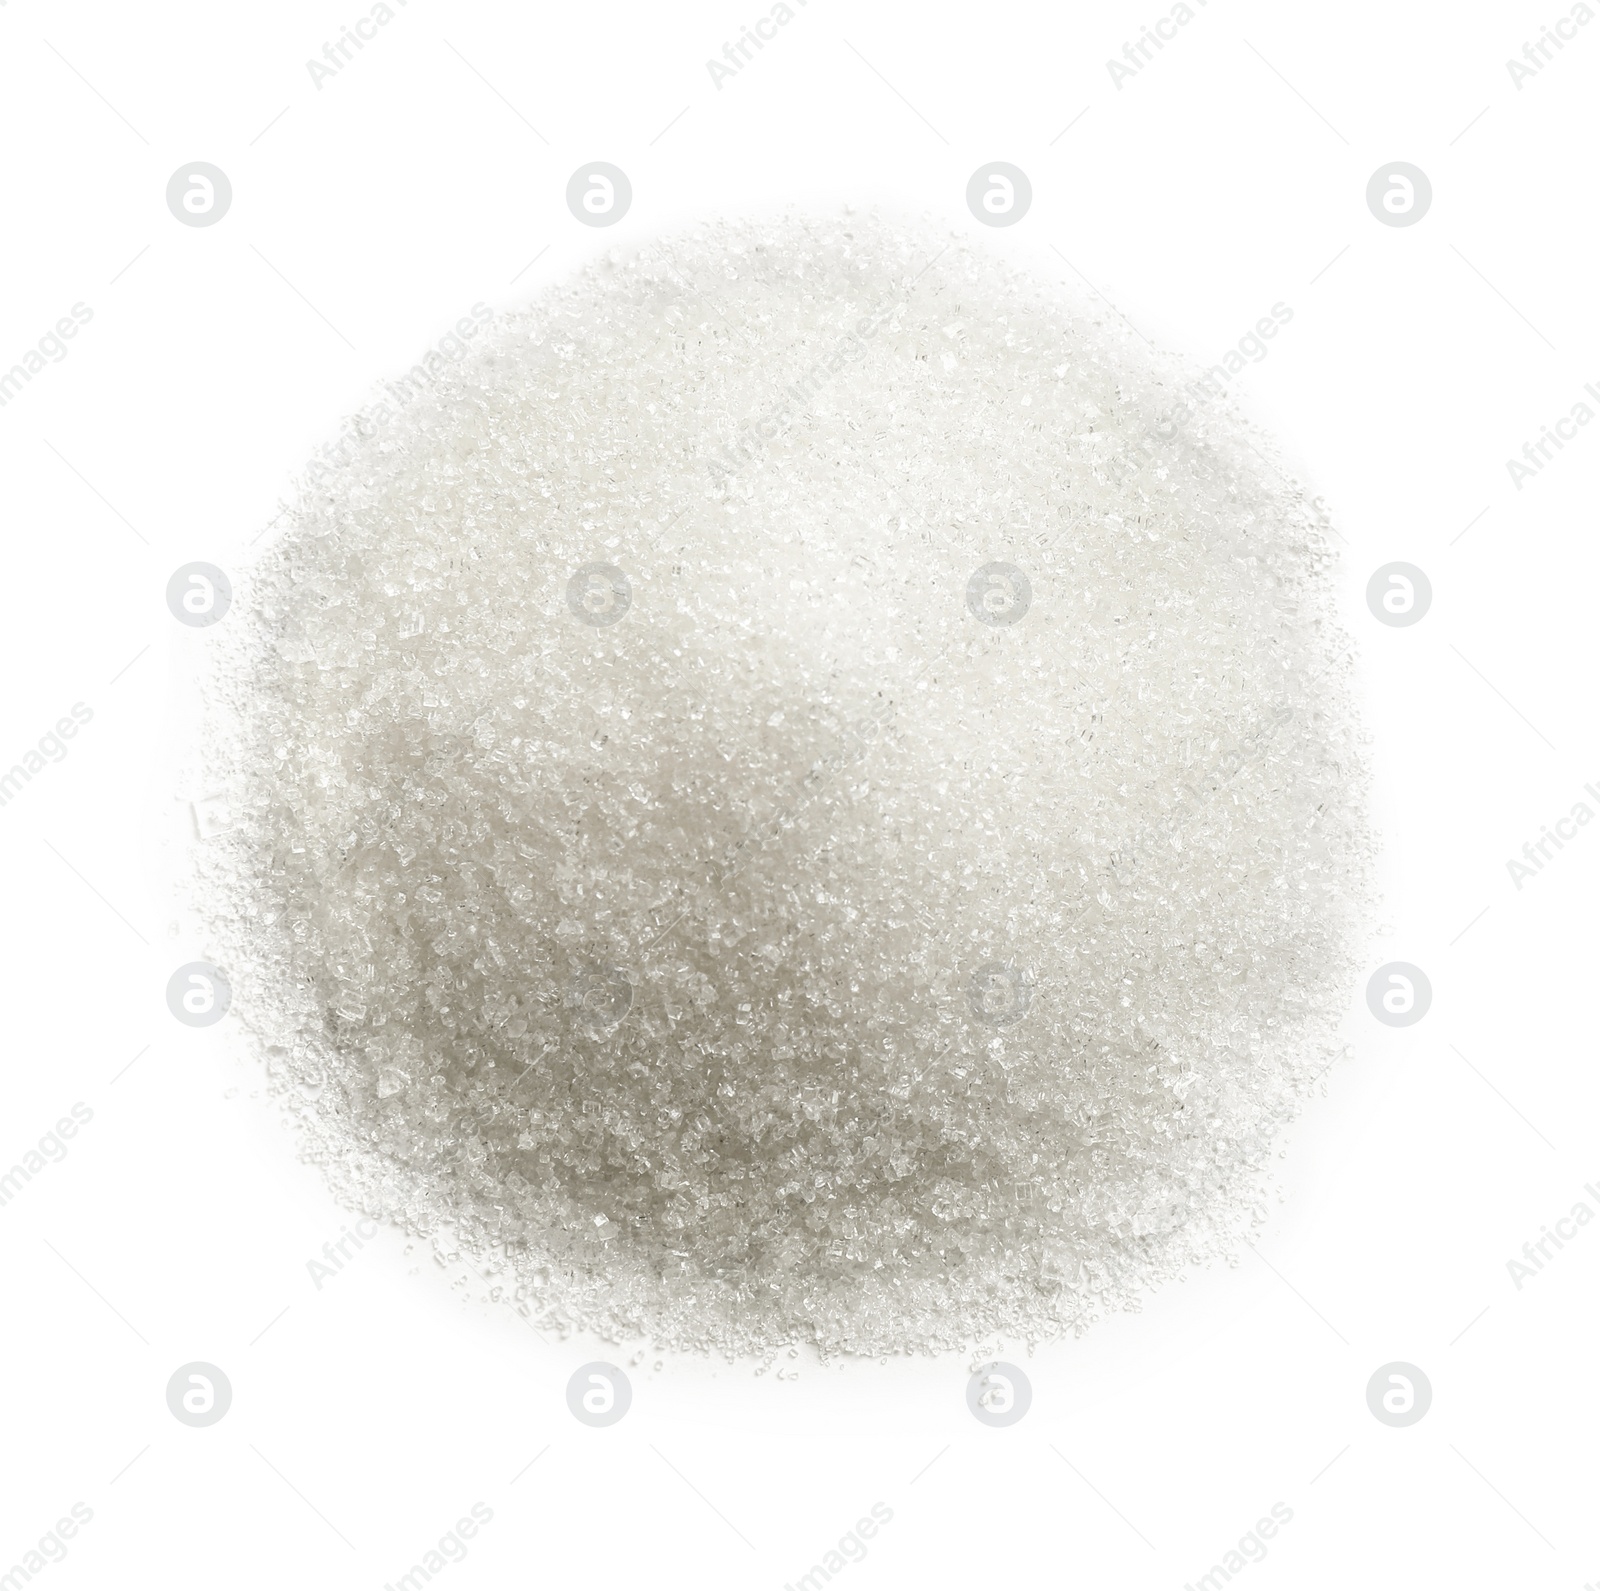 Photo of Pile of granulated sugar isolated on white